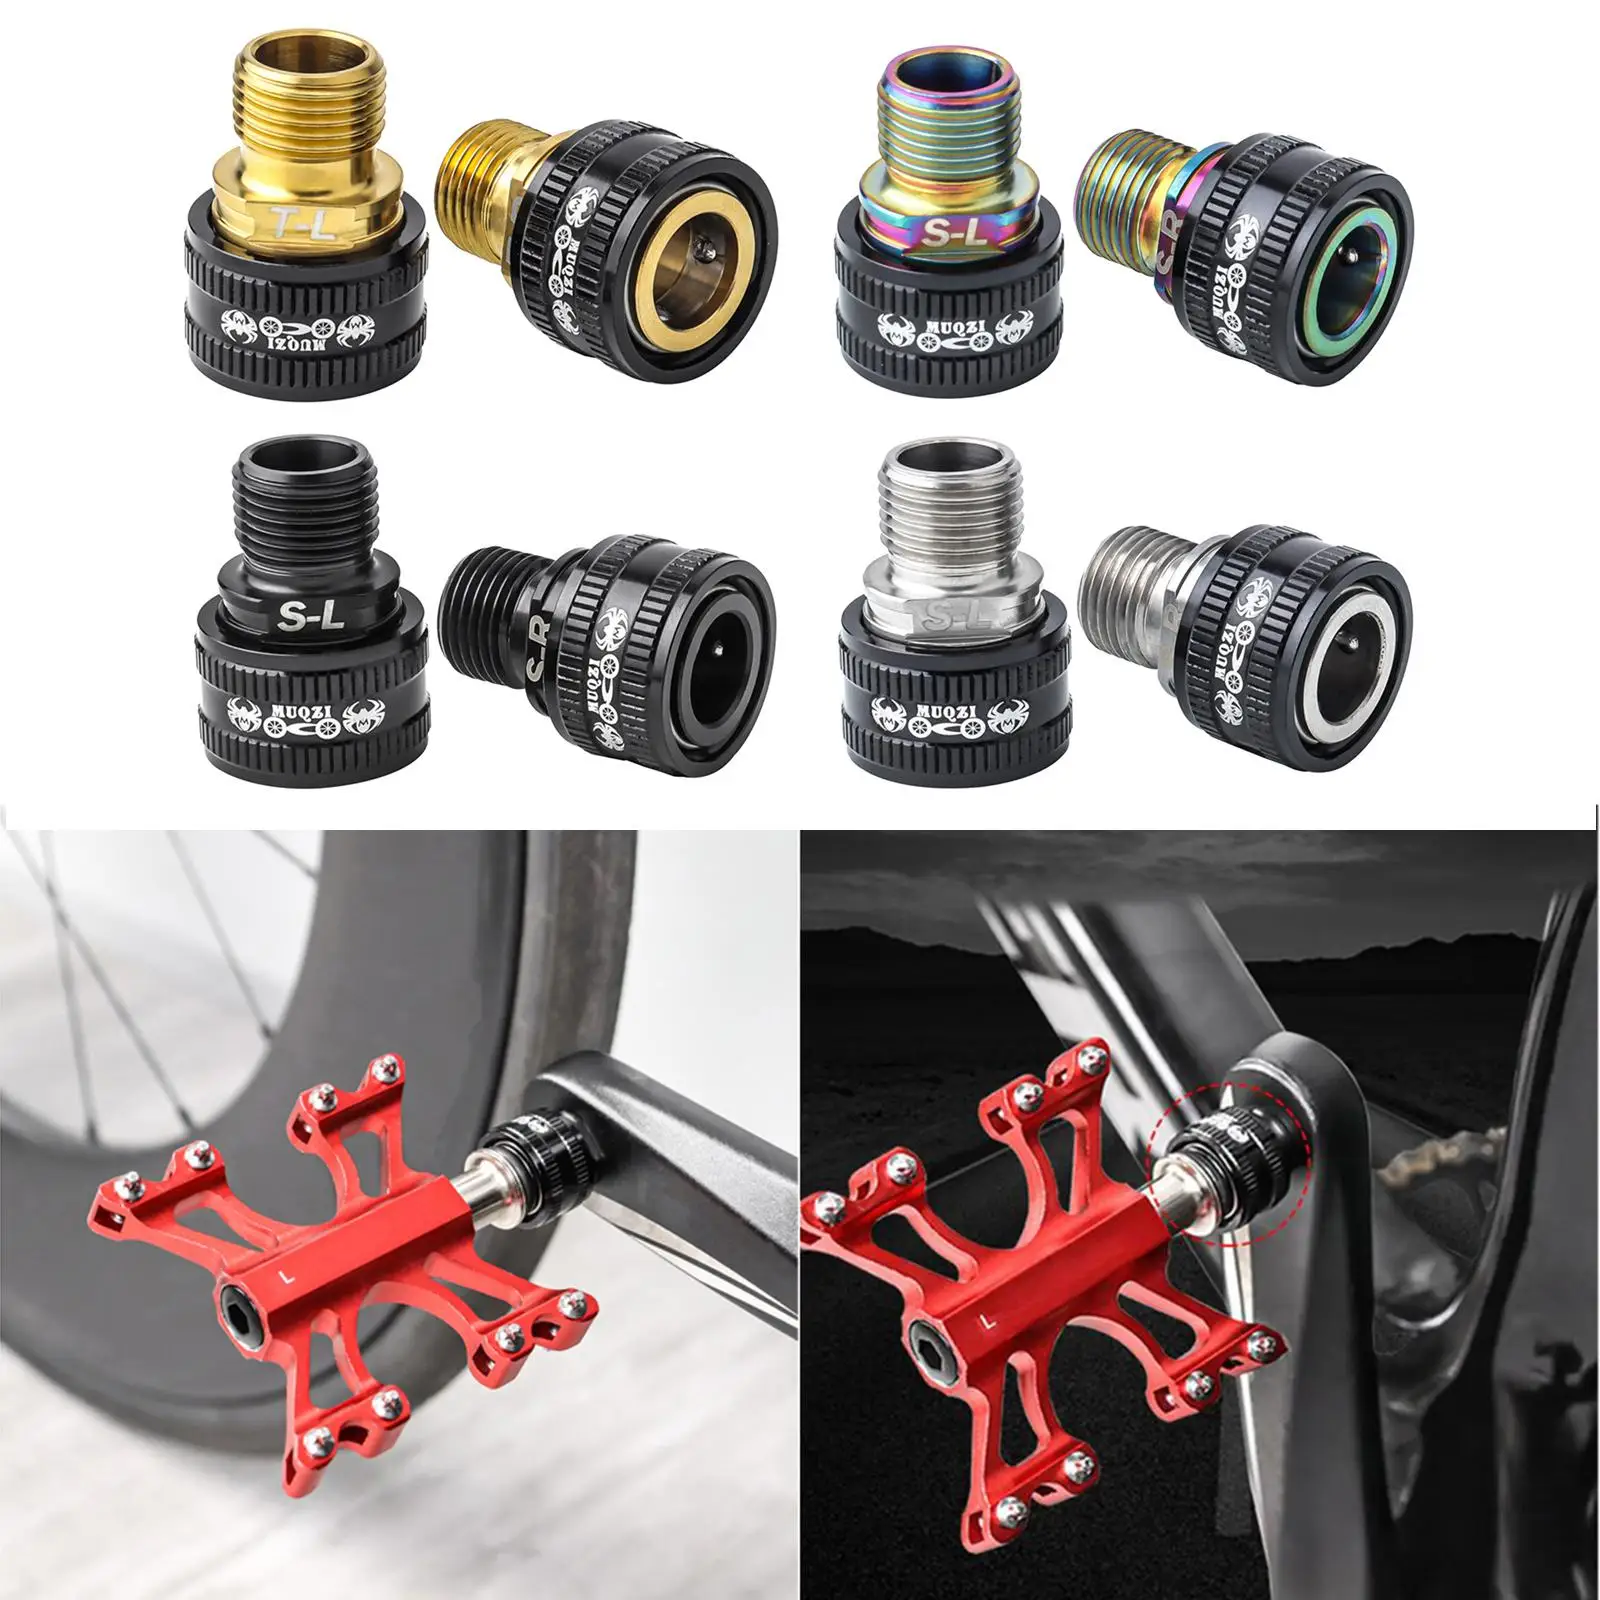 2x Bike Pedal Extender Pedal Spacers 9/16inch Shaft Pedal Extension Adapter